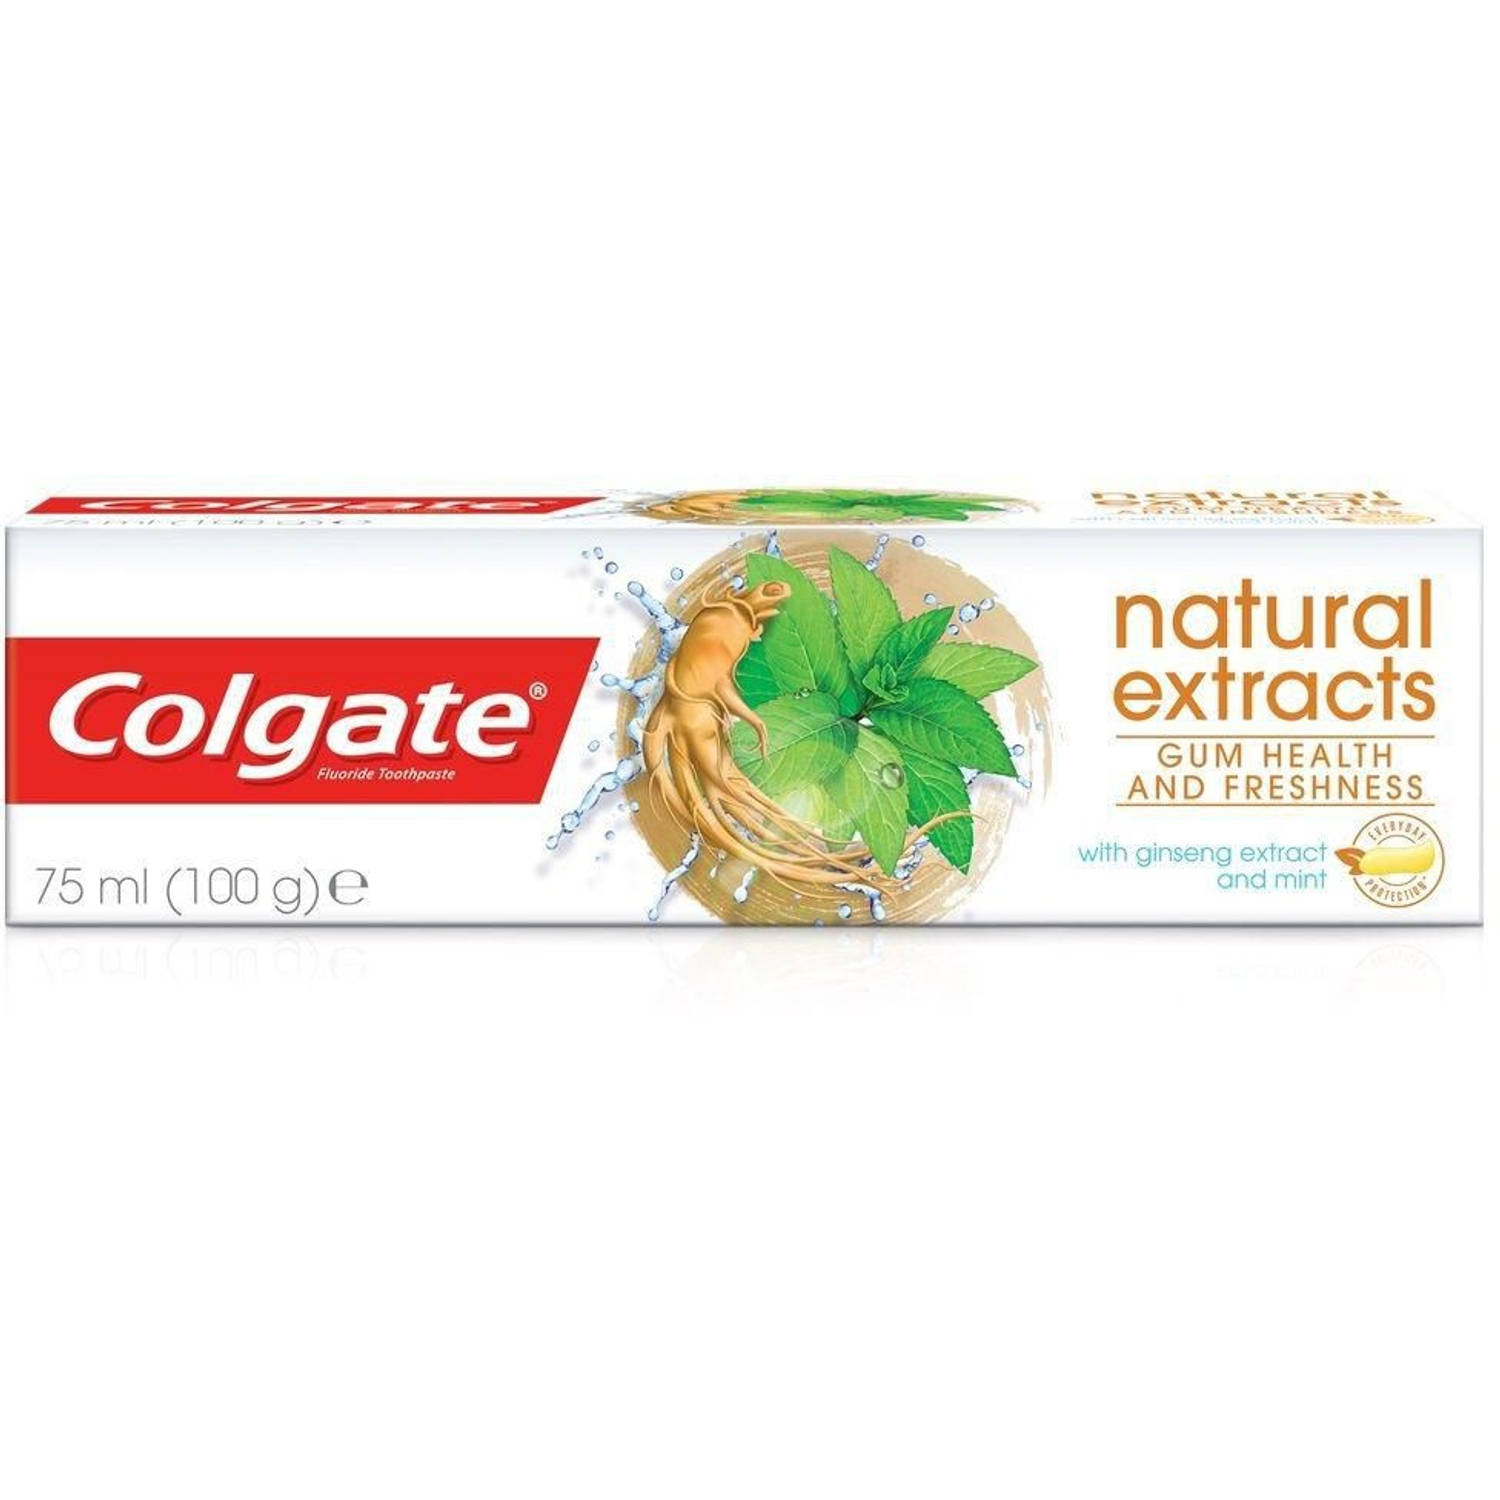 Tandpasta Natural Extracts Gum Health & Freshness With Ginseng Extract & Mint 75ml